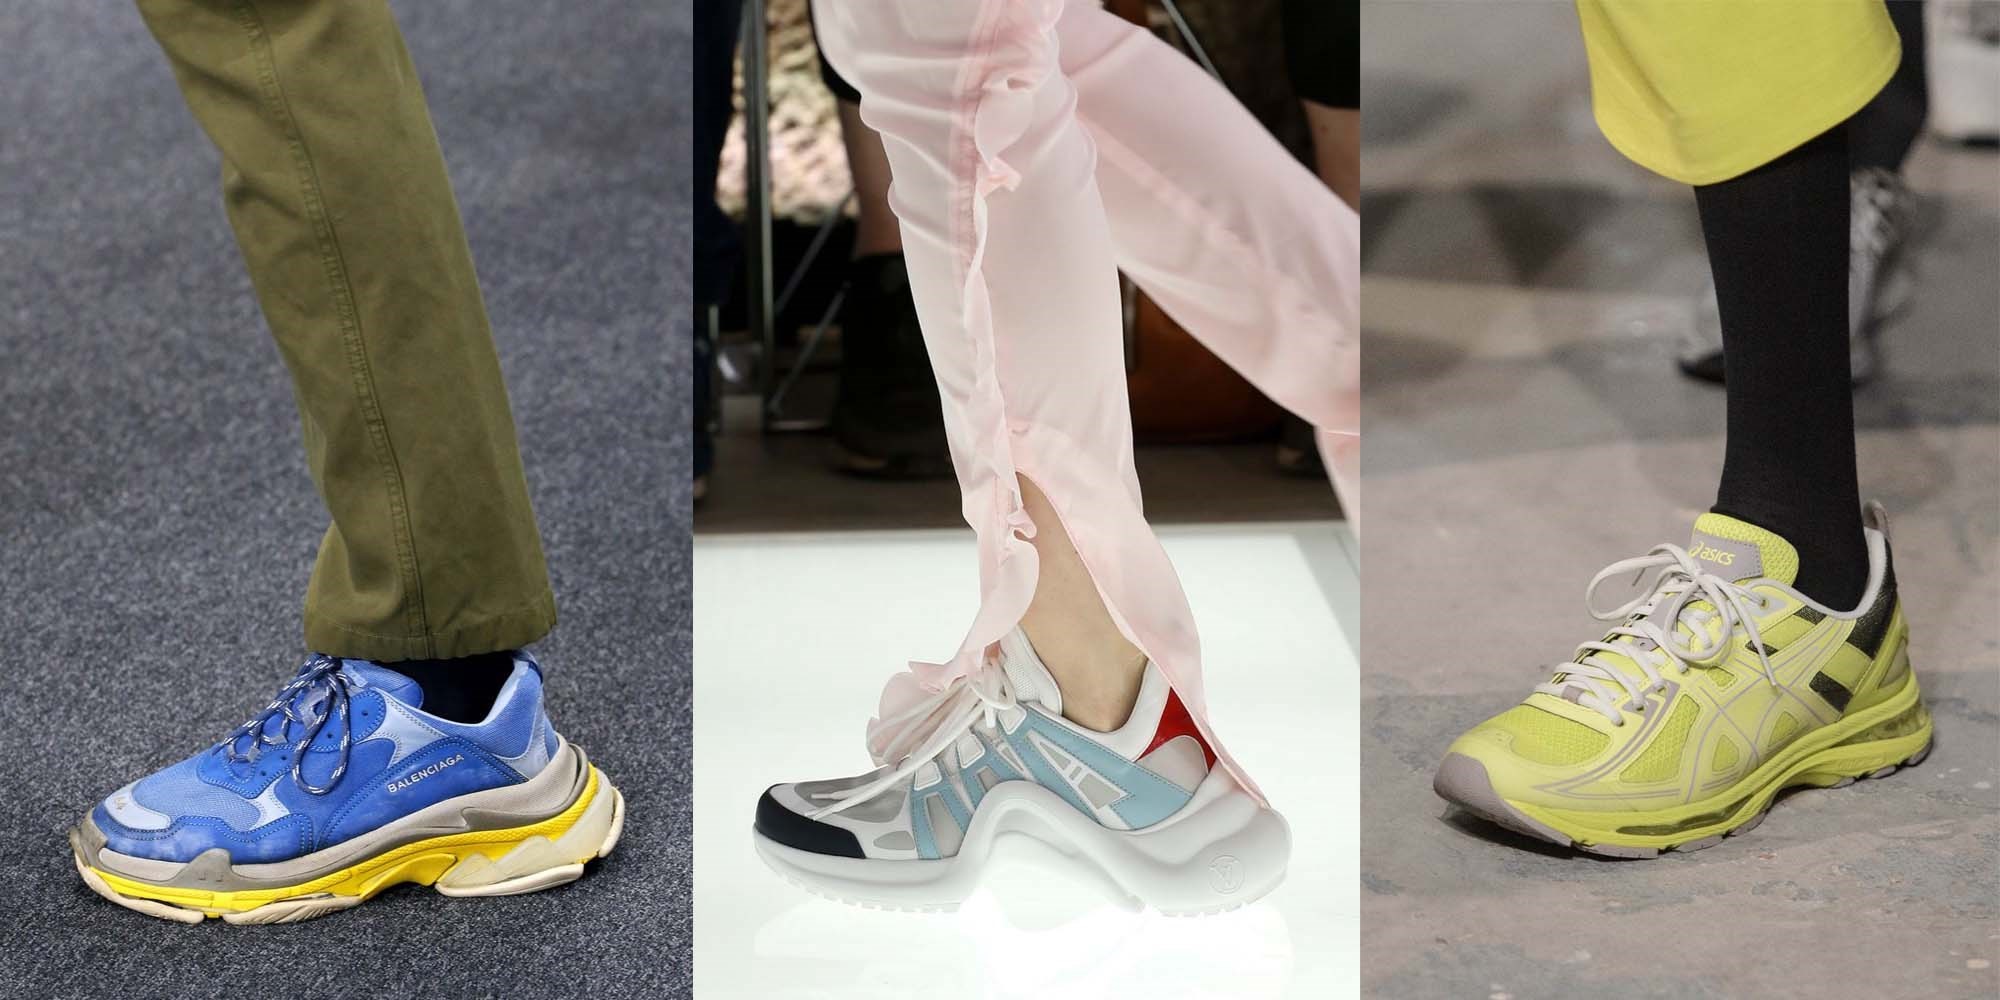 Ugly Shoes and Bad Fashion Plague Louis Vuitton's Fall 2019 Show